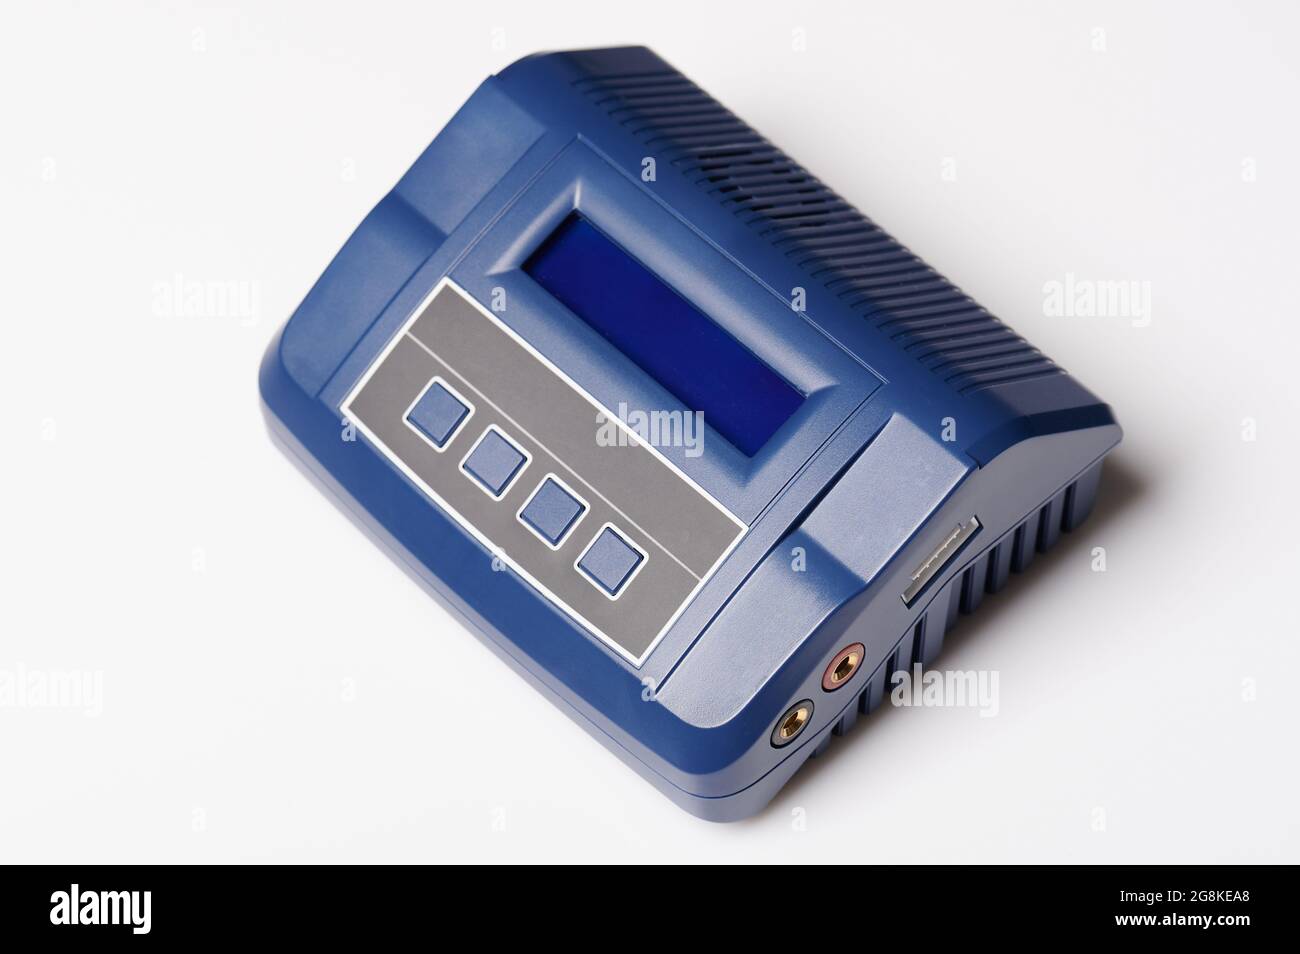 Blue professioanl charger with screen and buttons isolated on studio background Stock Photo